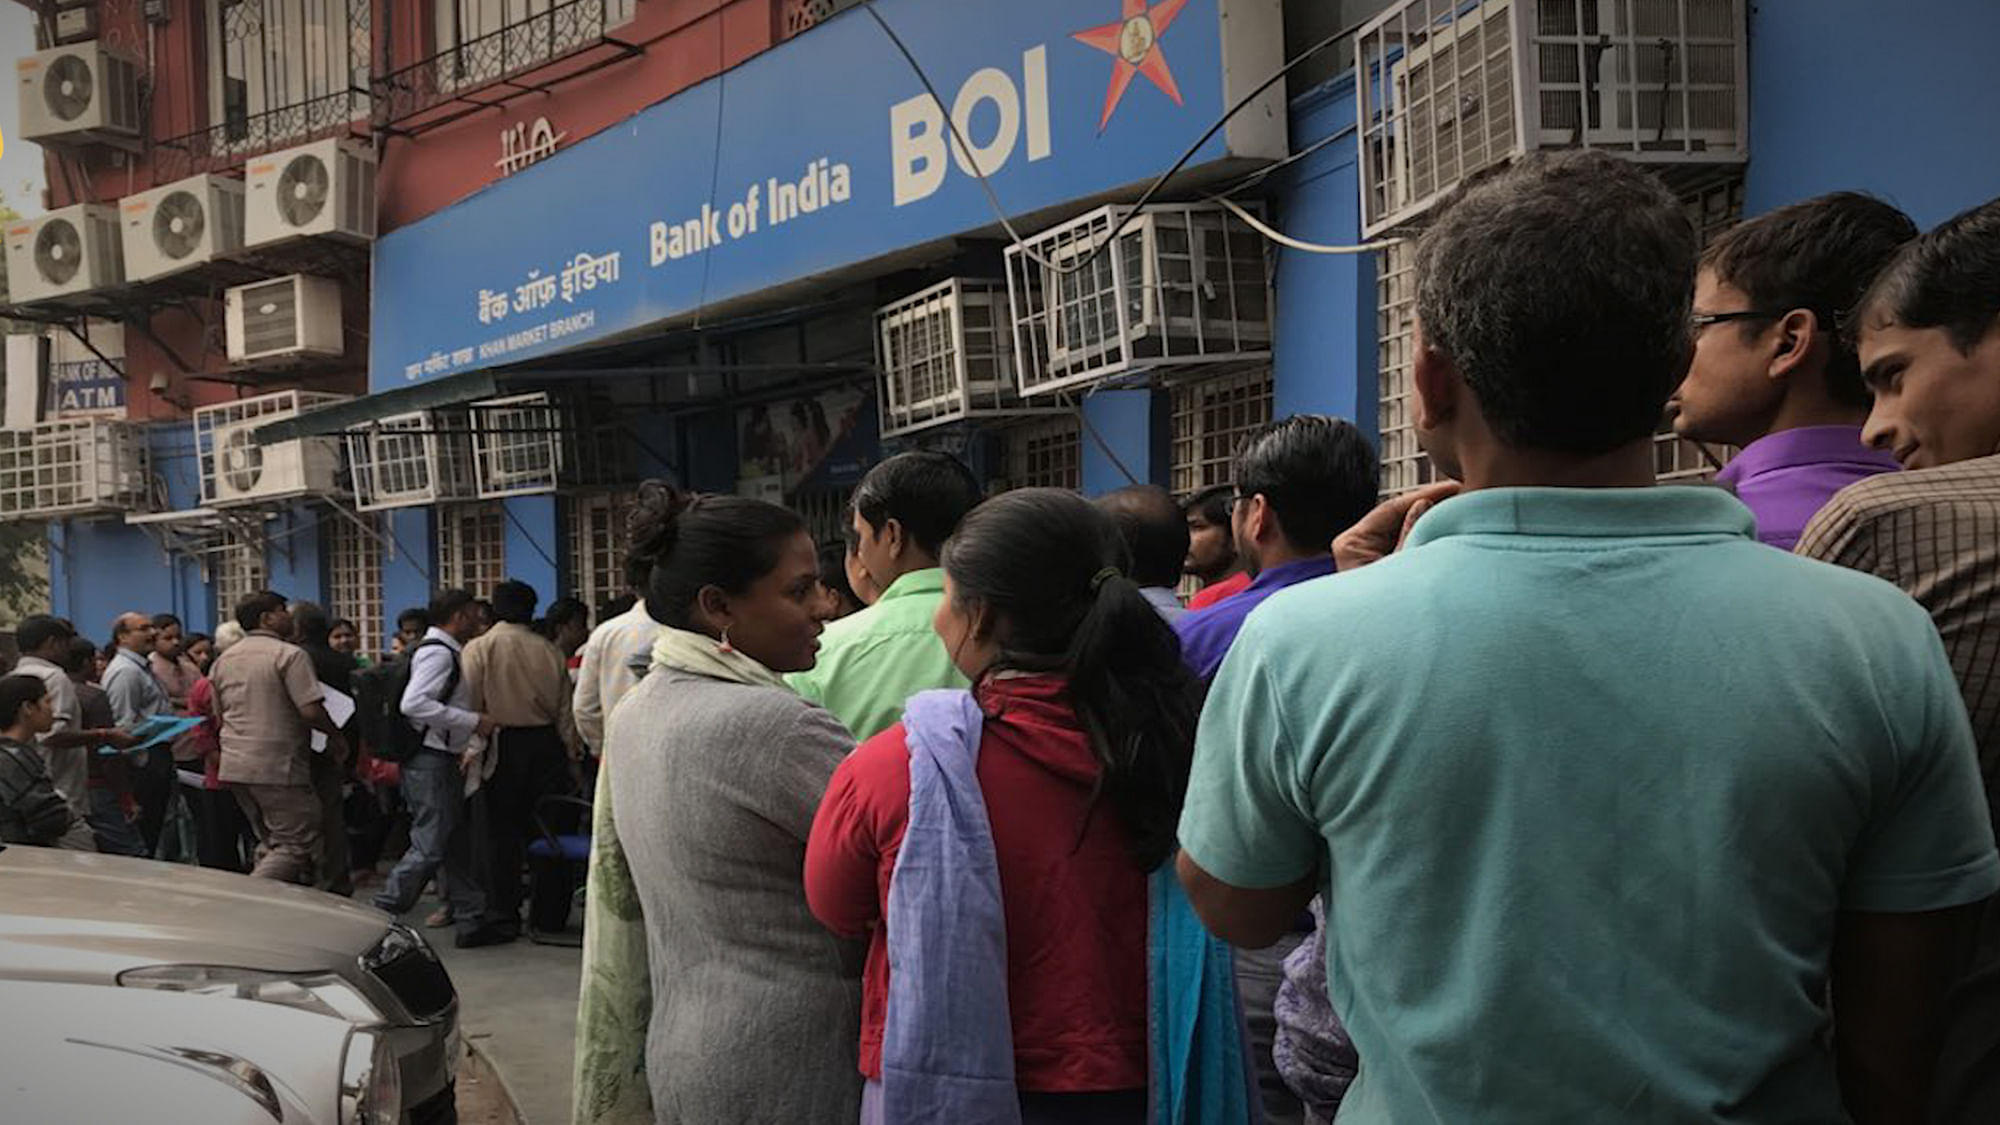 Long queues were witnessed in front of banks, with people lining up from 8 am in the morning. (Photo: <b>The Quint</b>)